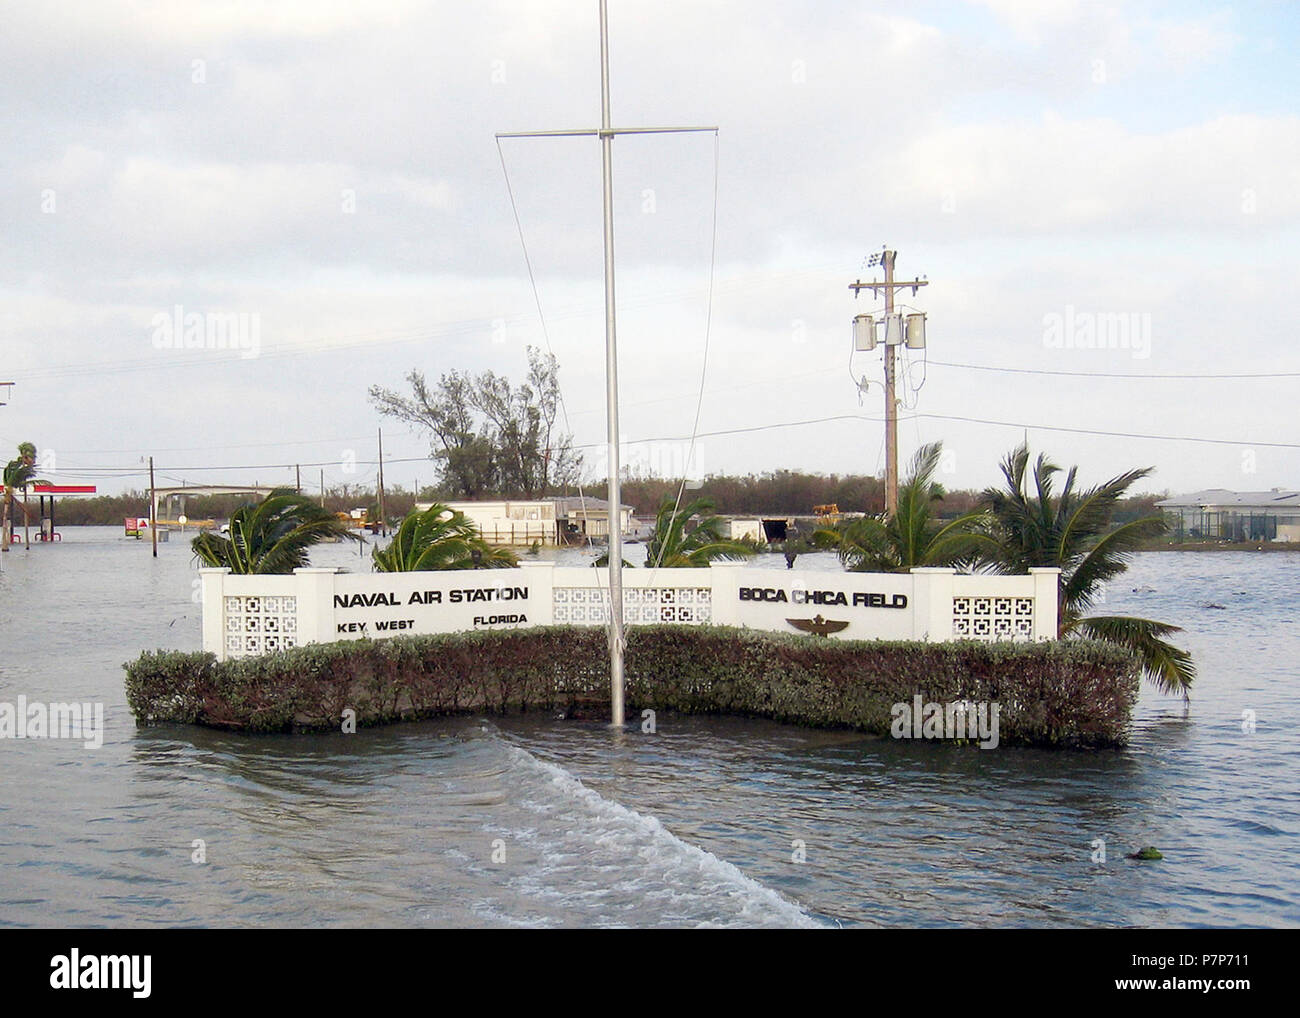 Hurricane Relief-26. The front gate of US Navy (USN) Naval Air Station (NAS) Key West/Boca Chica Field, Florida (FL), illustrates the major flooding after Category 3 Hurricane Wilma hit the area. Stock Photo